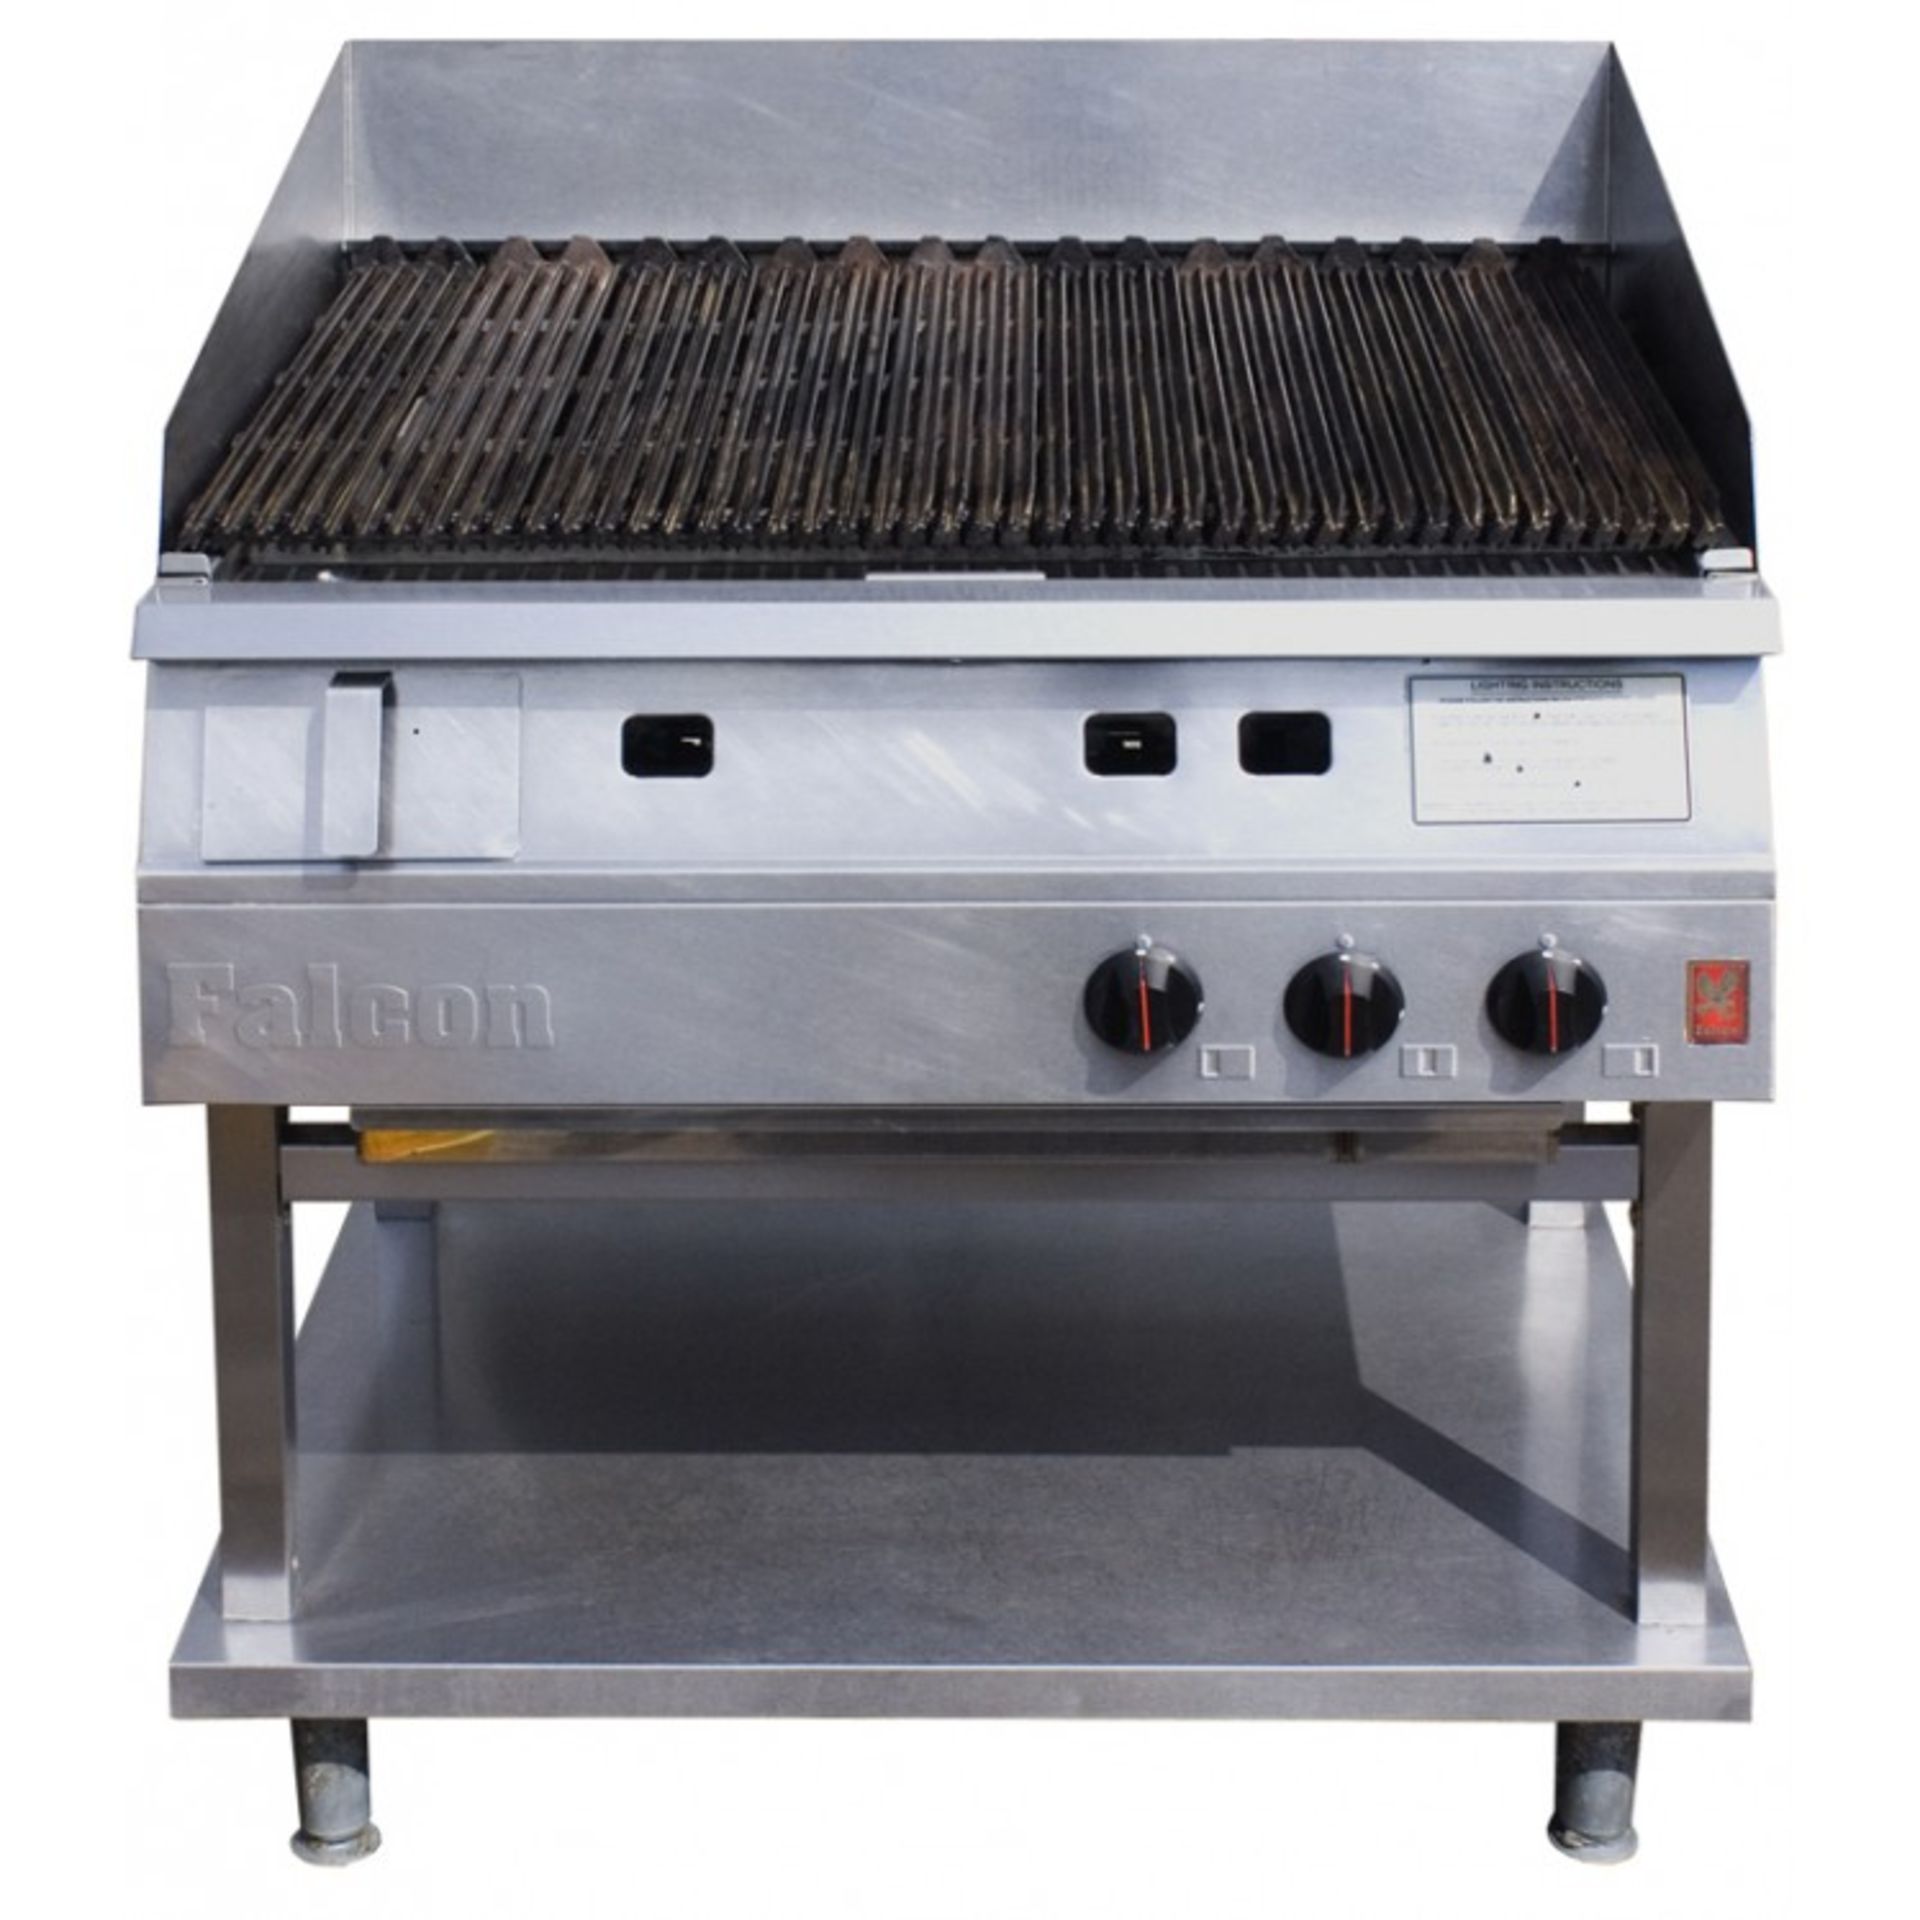 1 x  Falcon Griddle - Like New

Falcon Griddle with stainless steel stand and shelf. You will find